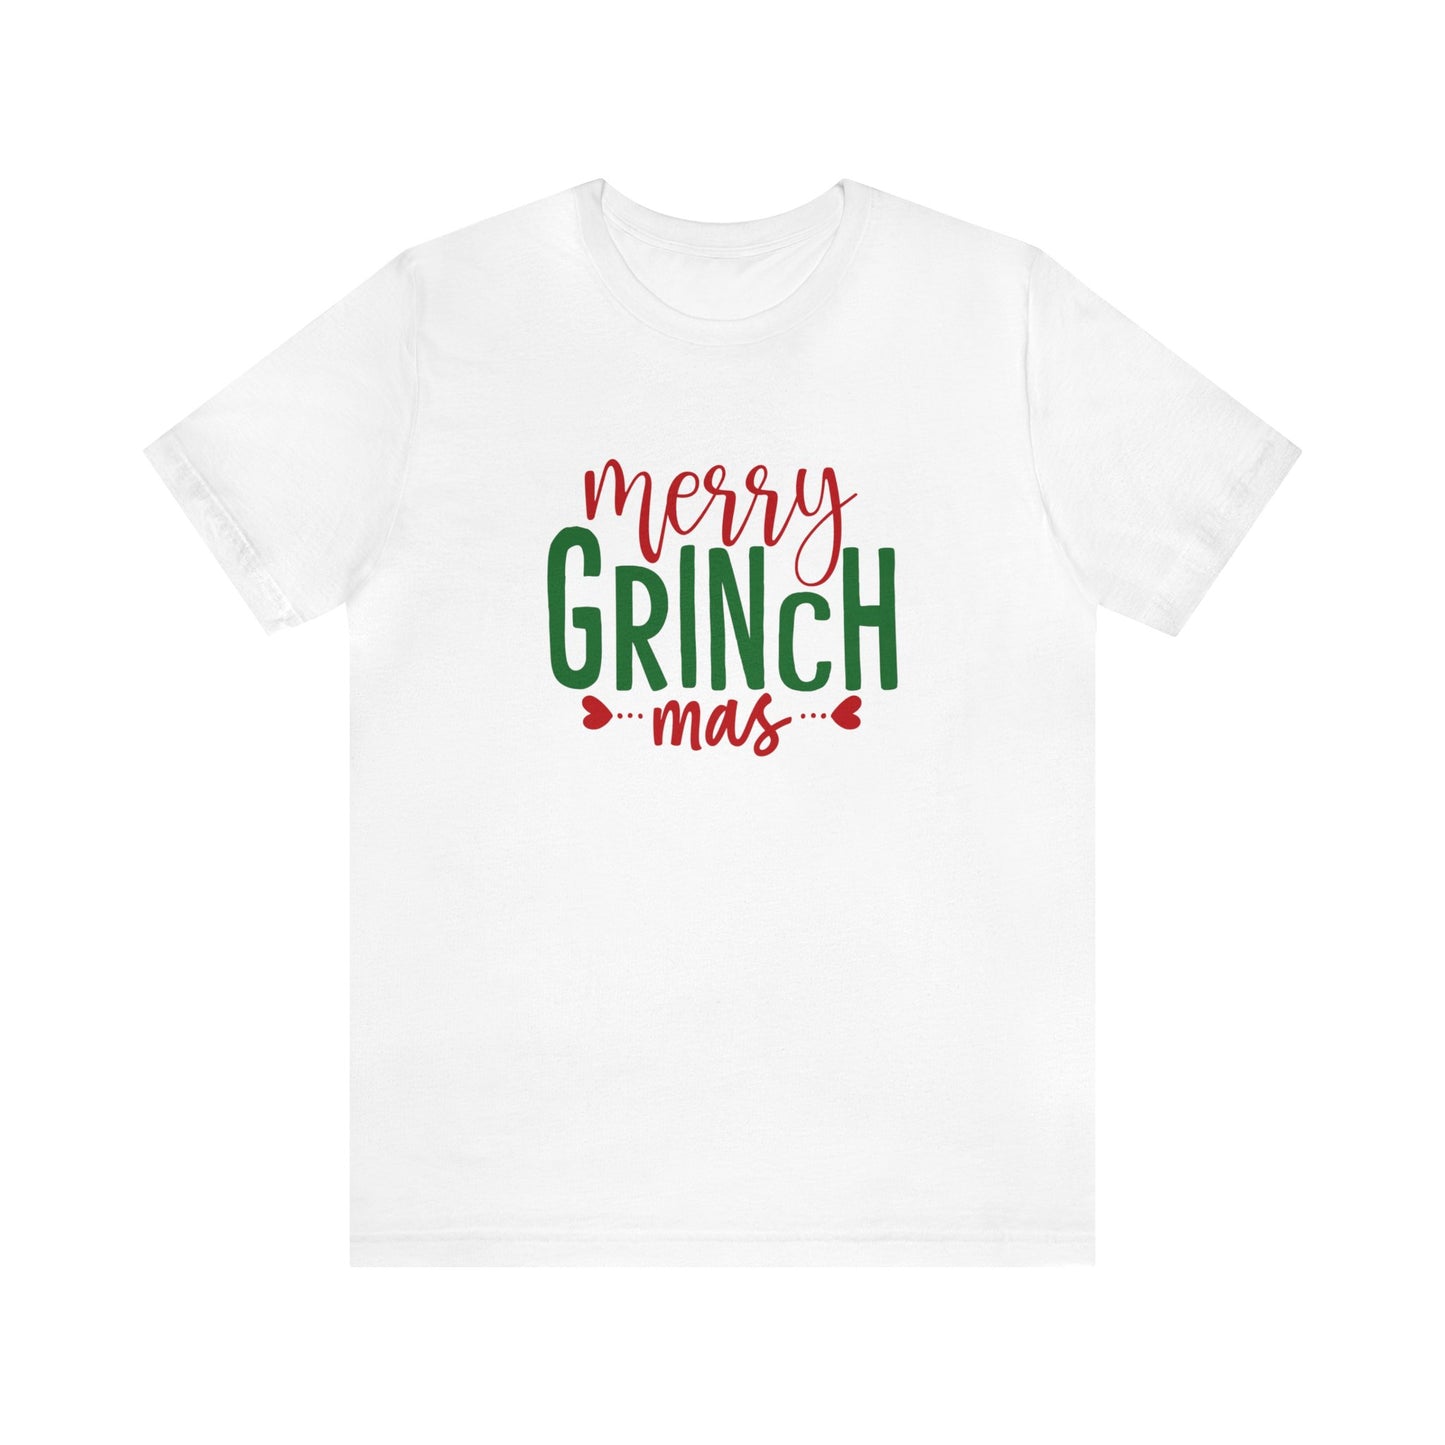 Grinch T-Shirt For Merry Christmas T Shirt For Funny Holiday TShirt For Xmas Gift Idea